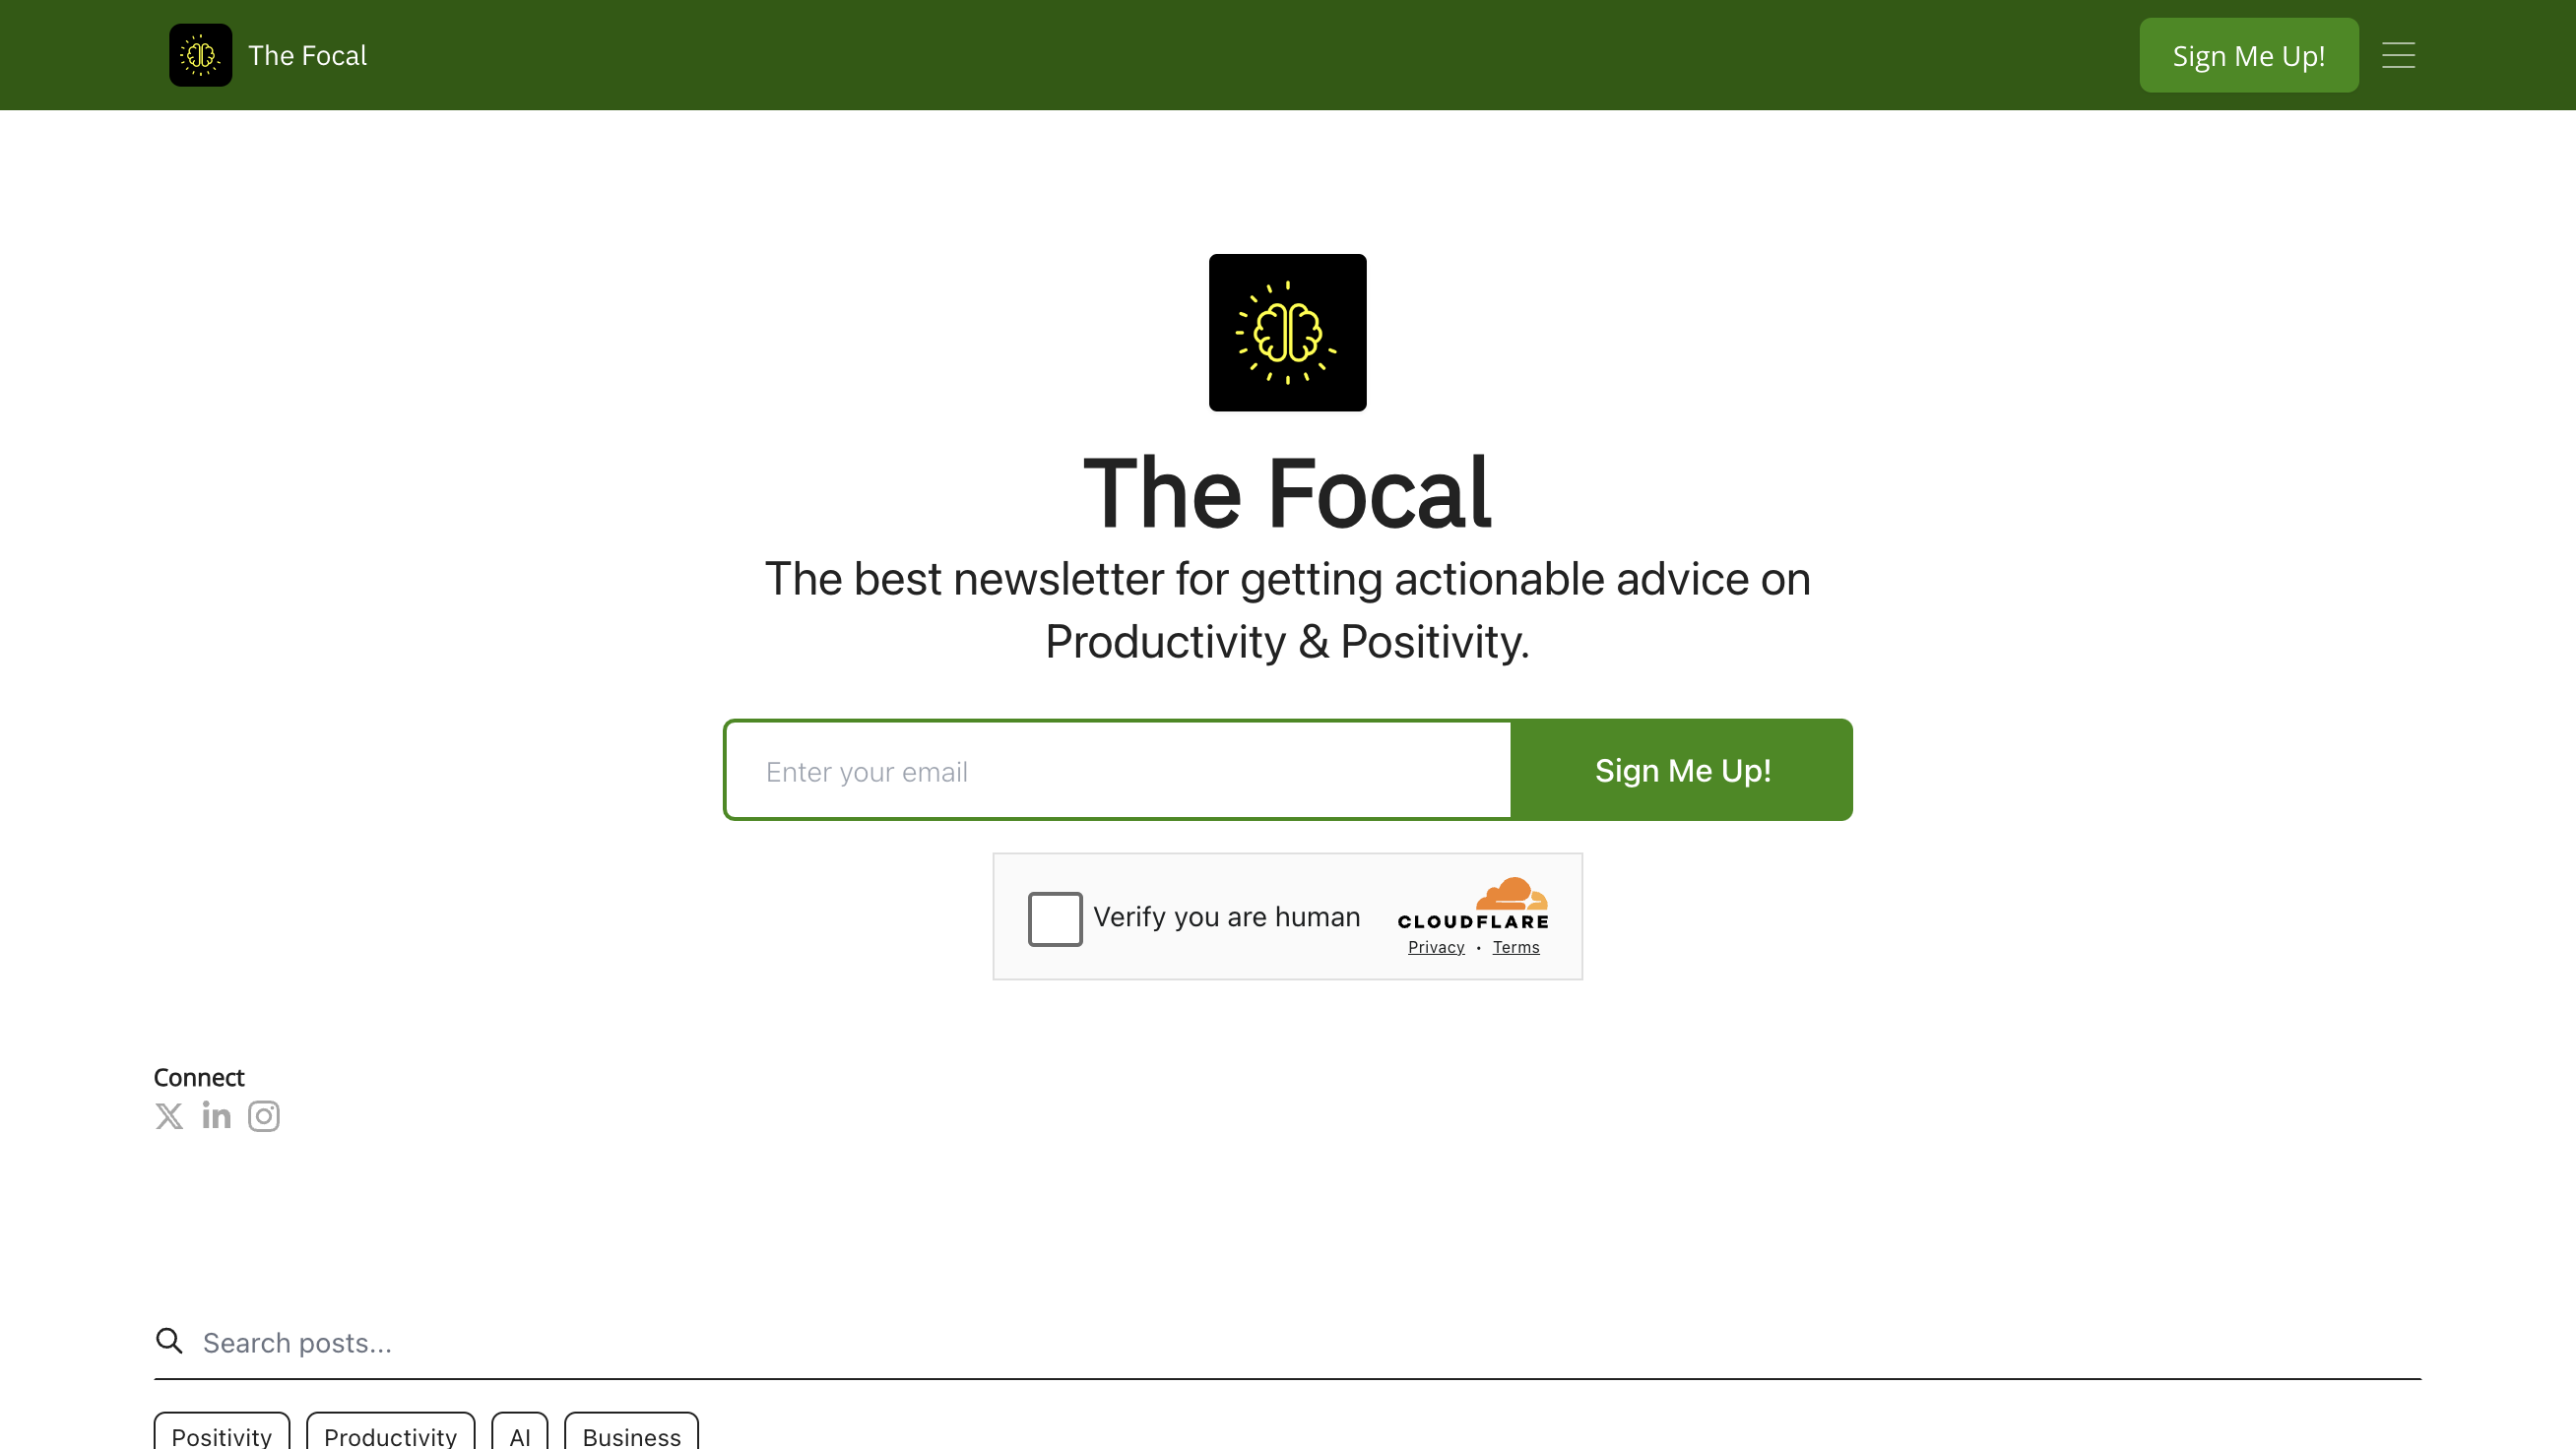 The Focal homepage